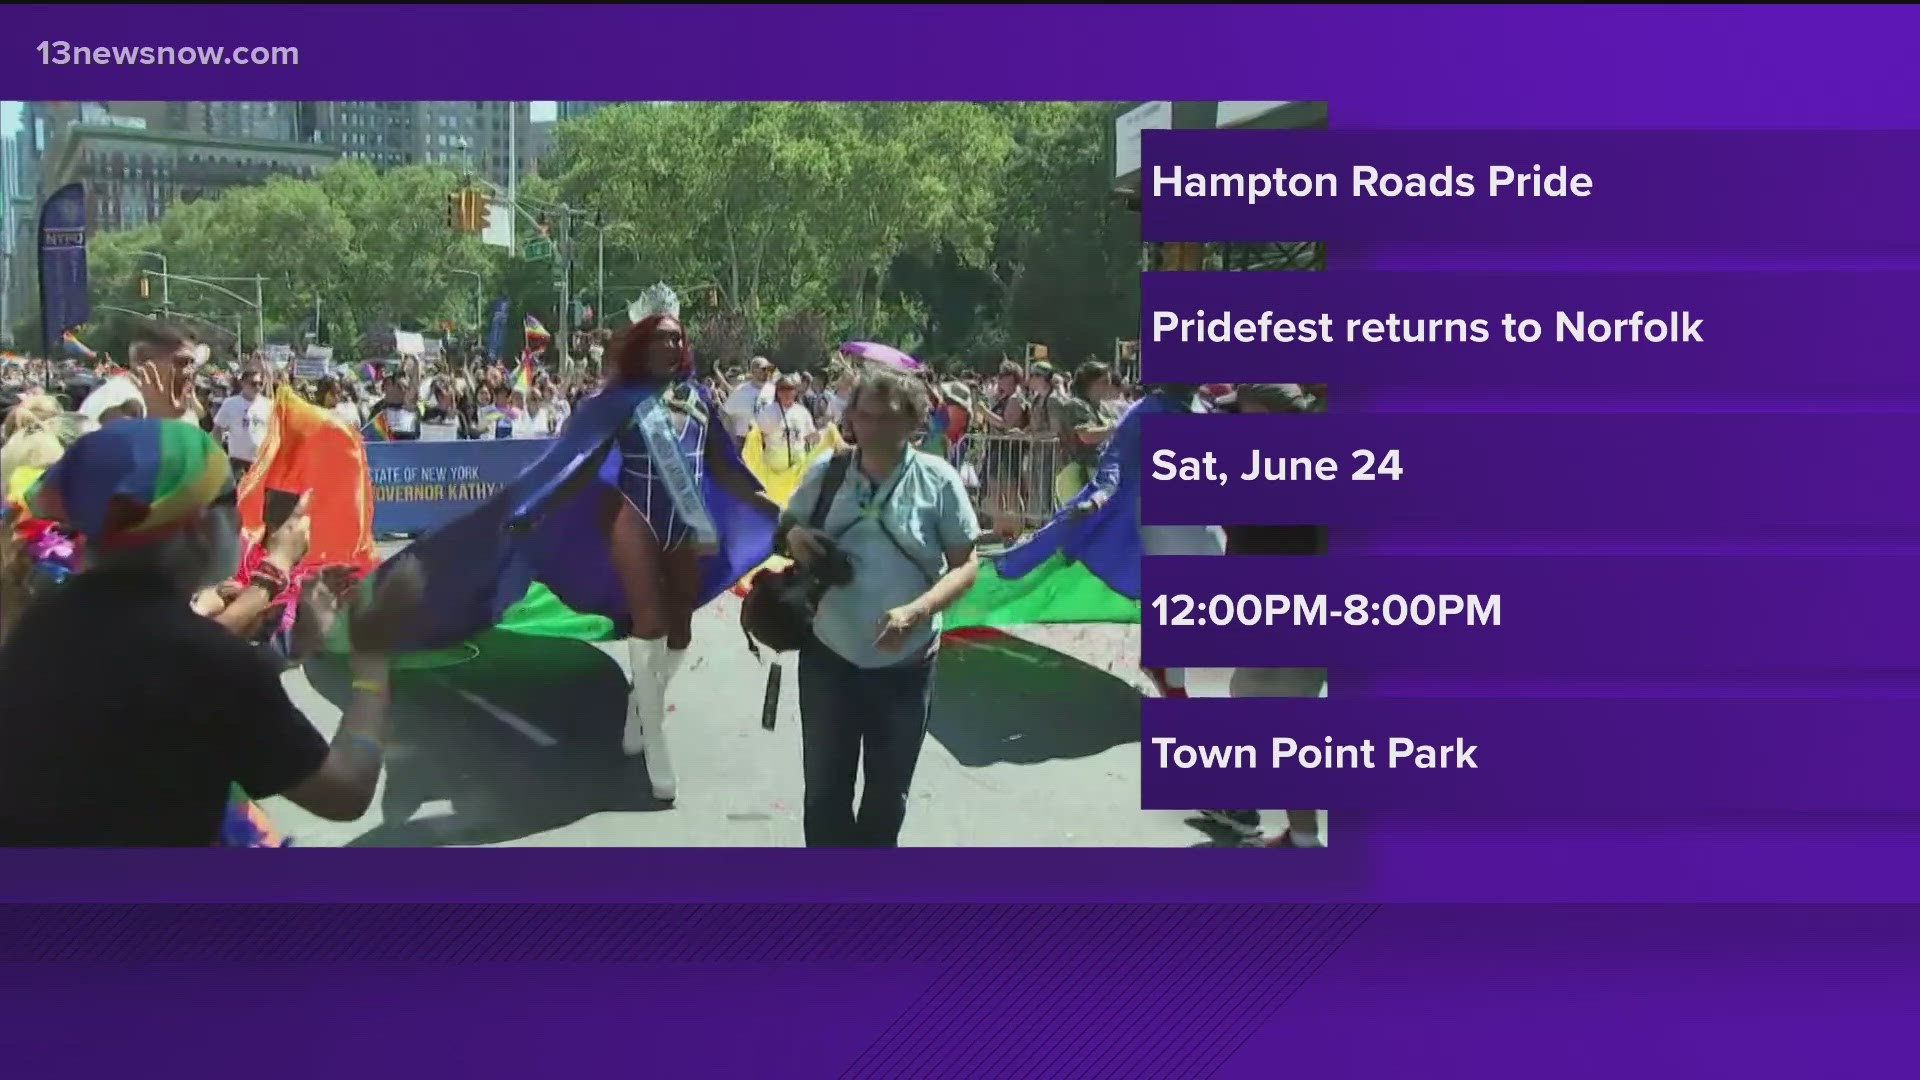 It's the beginning of Pride Month. LQBTQ+ celebrations are happening all across the nation and here in Hampton Roads.